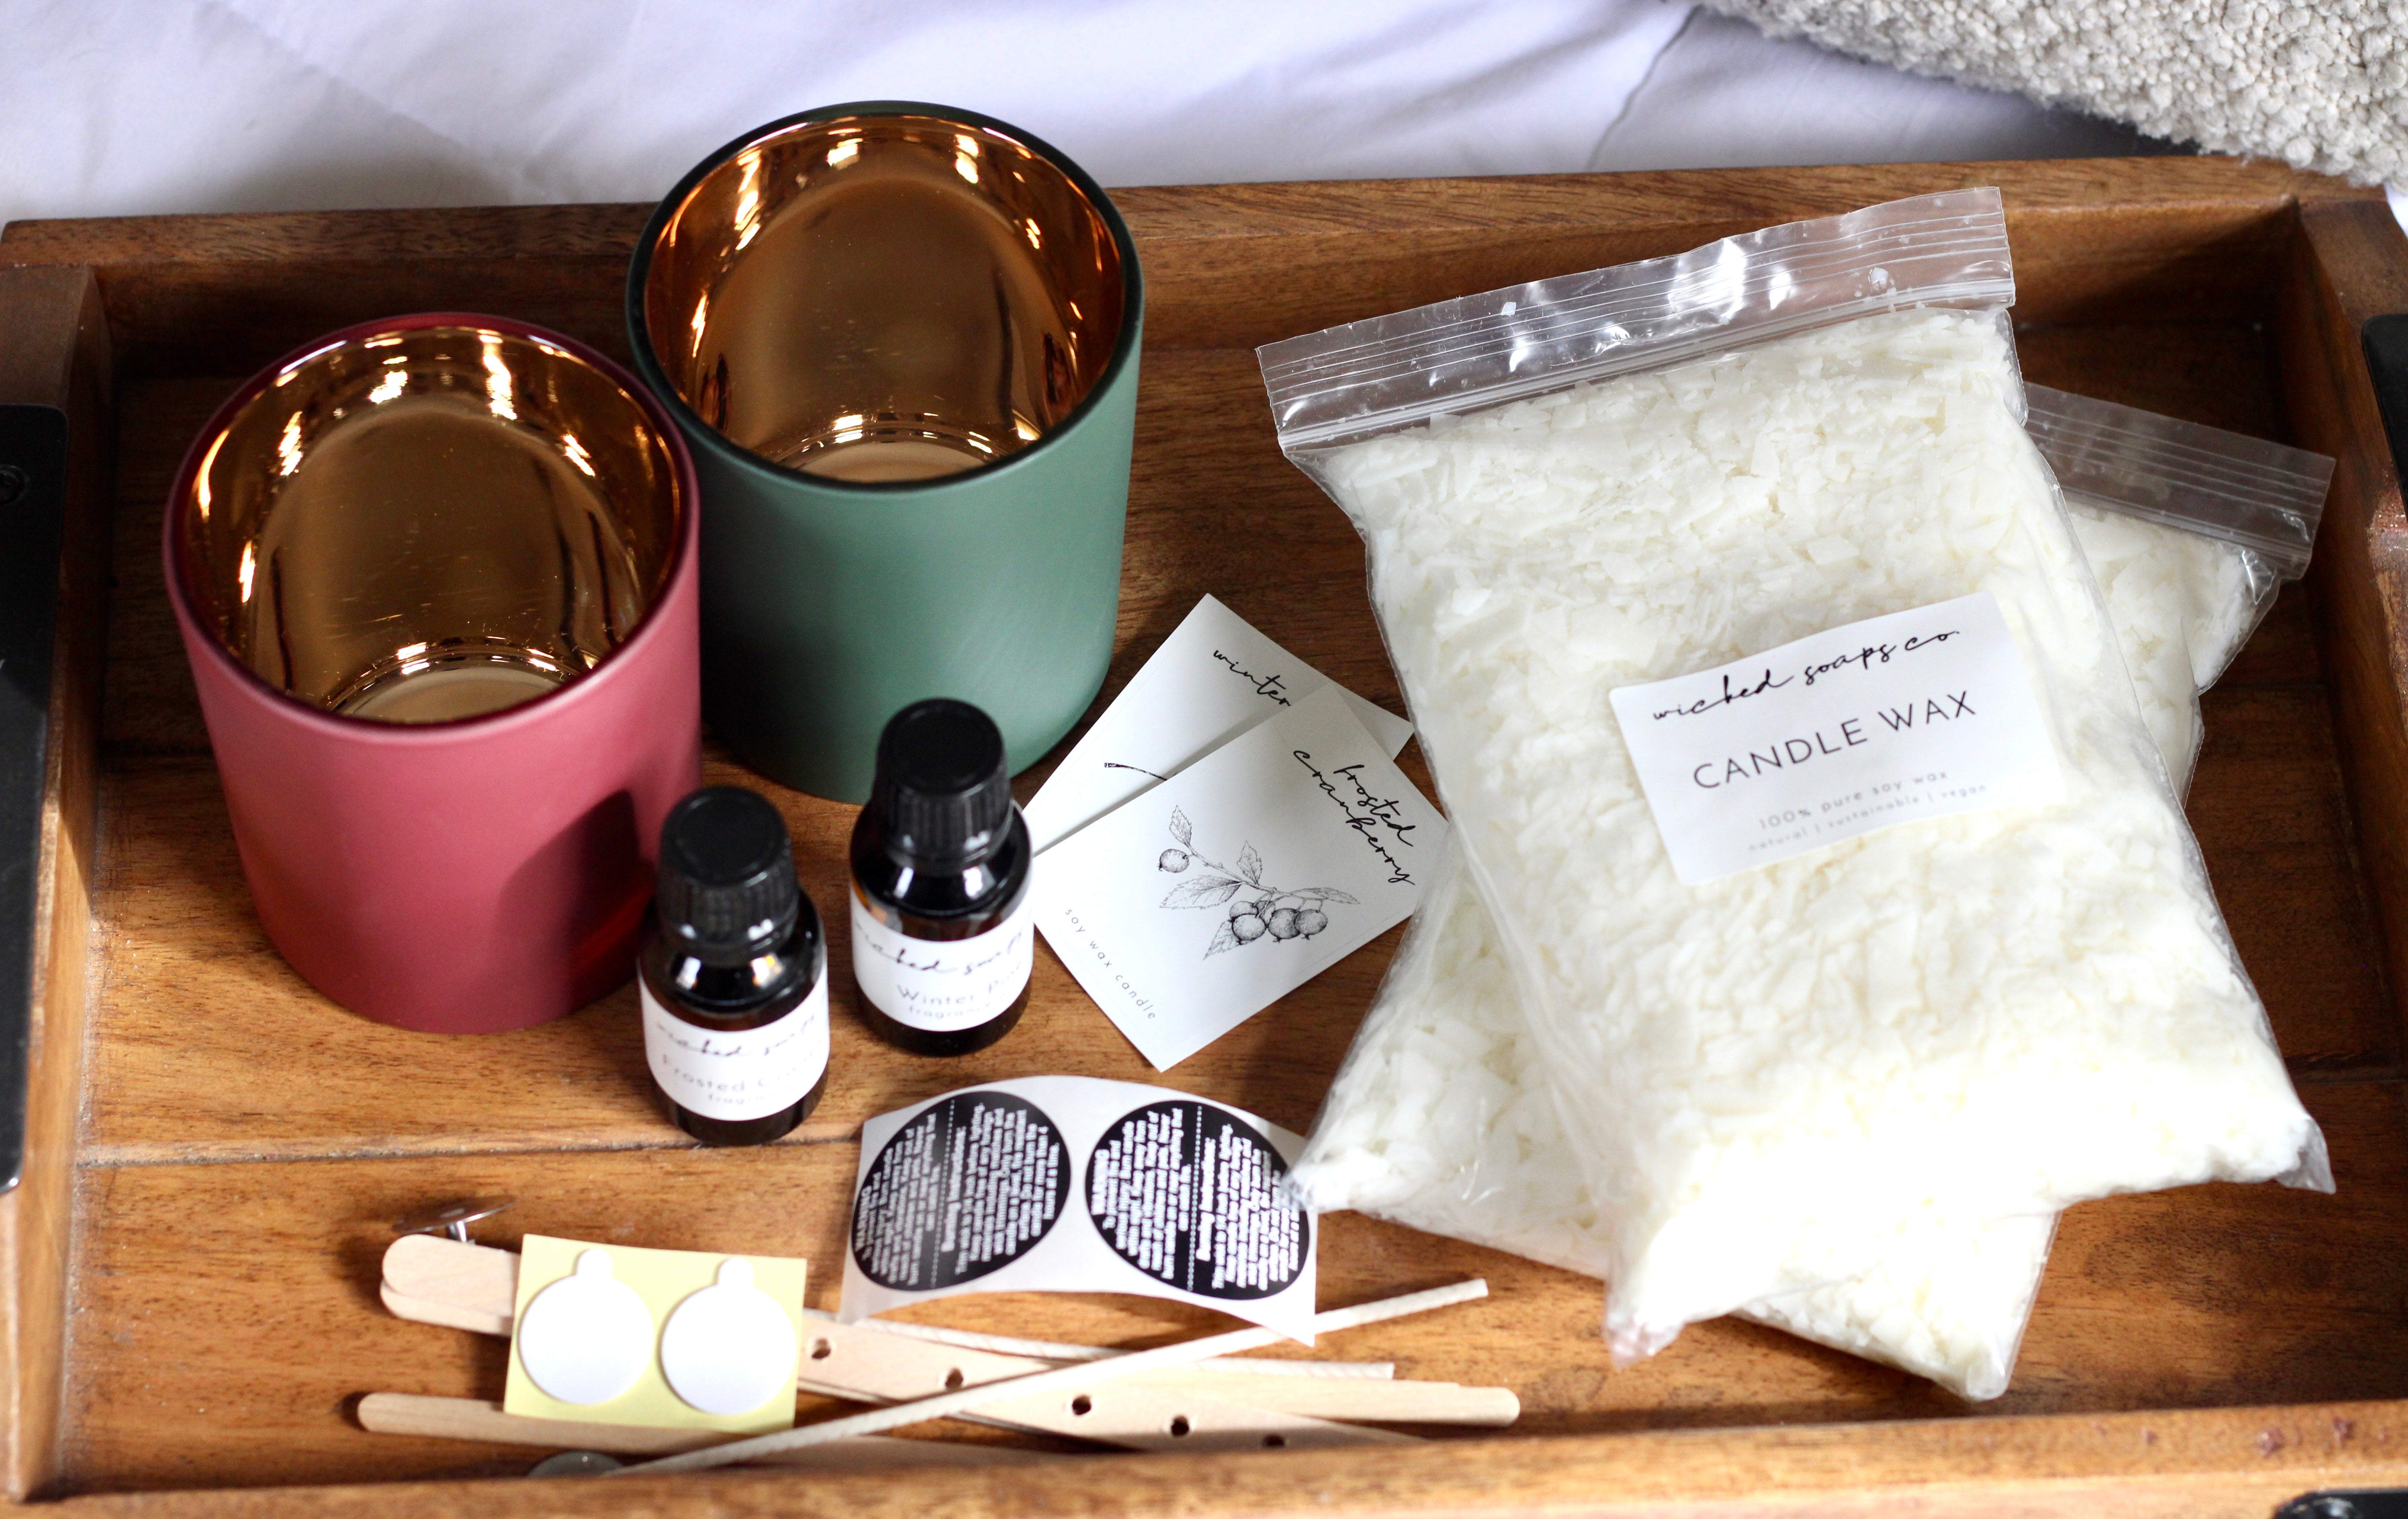 Candle Making Kits with Soy wax and luxury fragrance